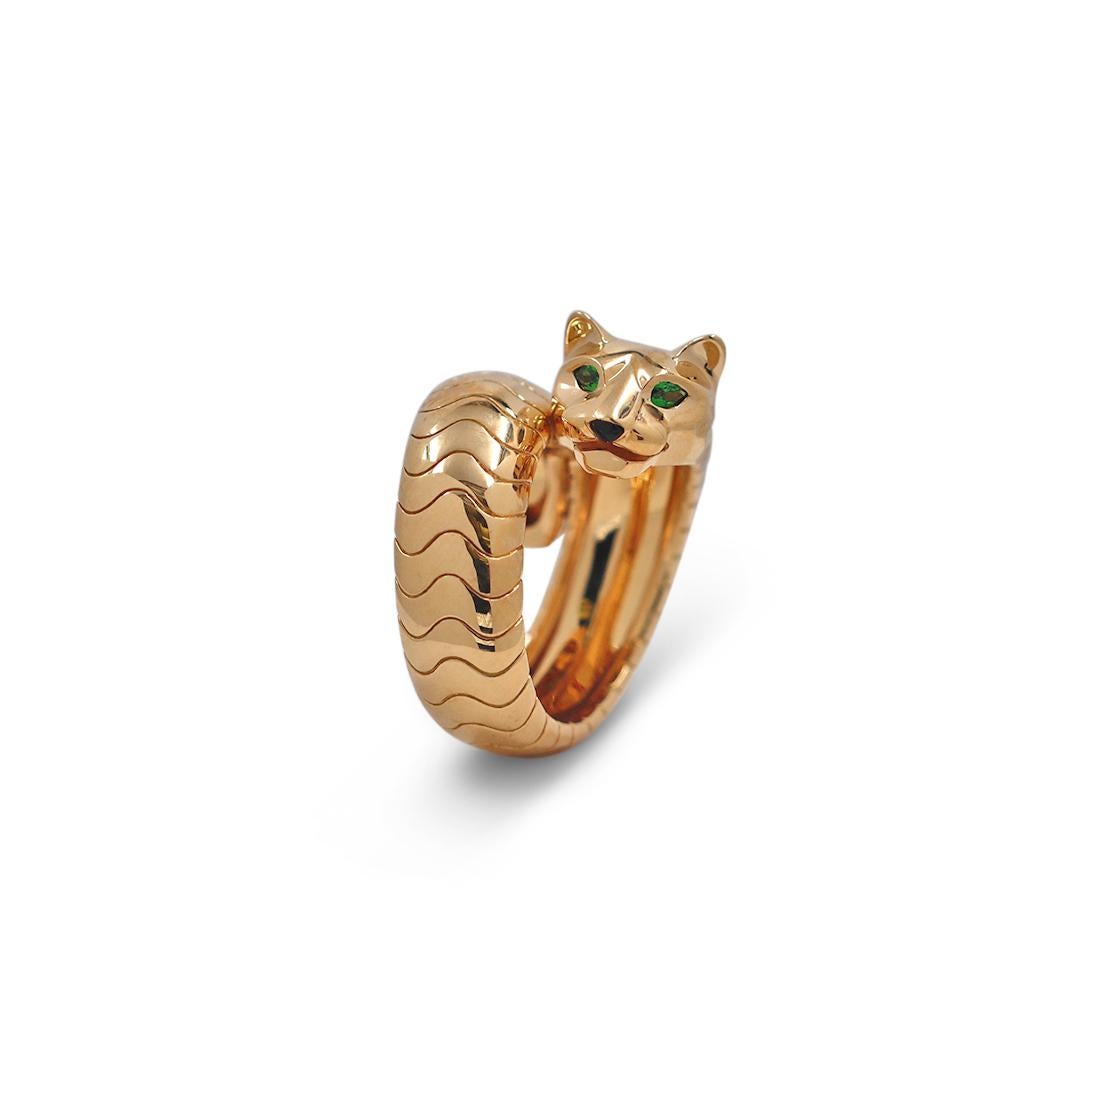 Authentic Cartier ring from the Panthère de Cartier collection centering on a single panther, an iconic symbol of the house. The ring is crafted in 18 karat yellow gold. The panther is completed with tsavorite garnet eyes and a carved black onyx